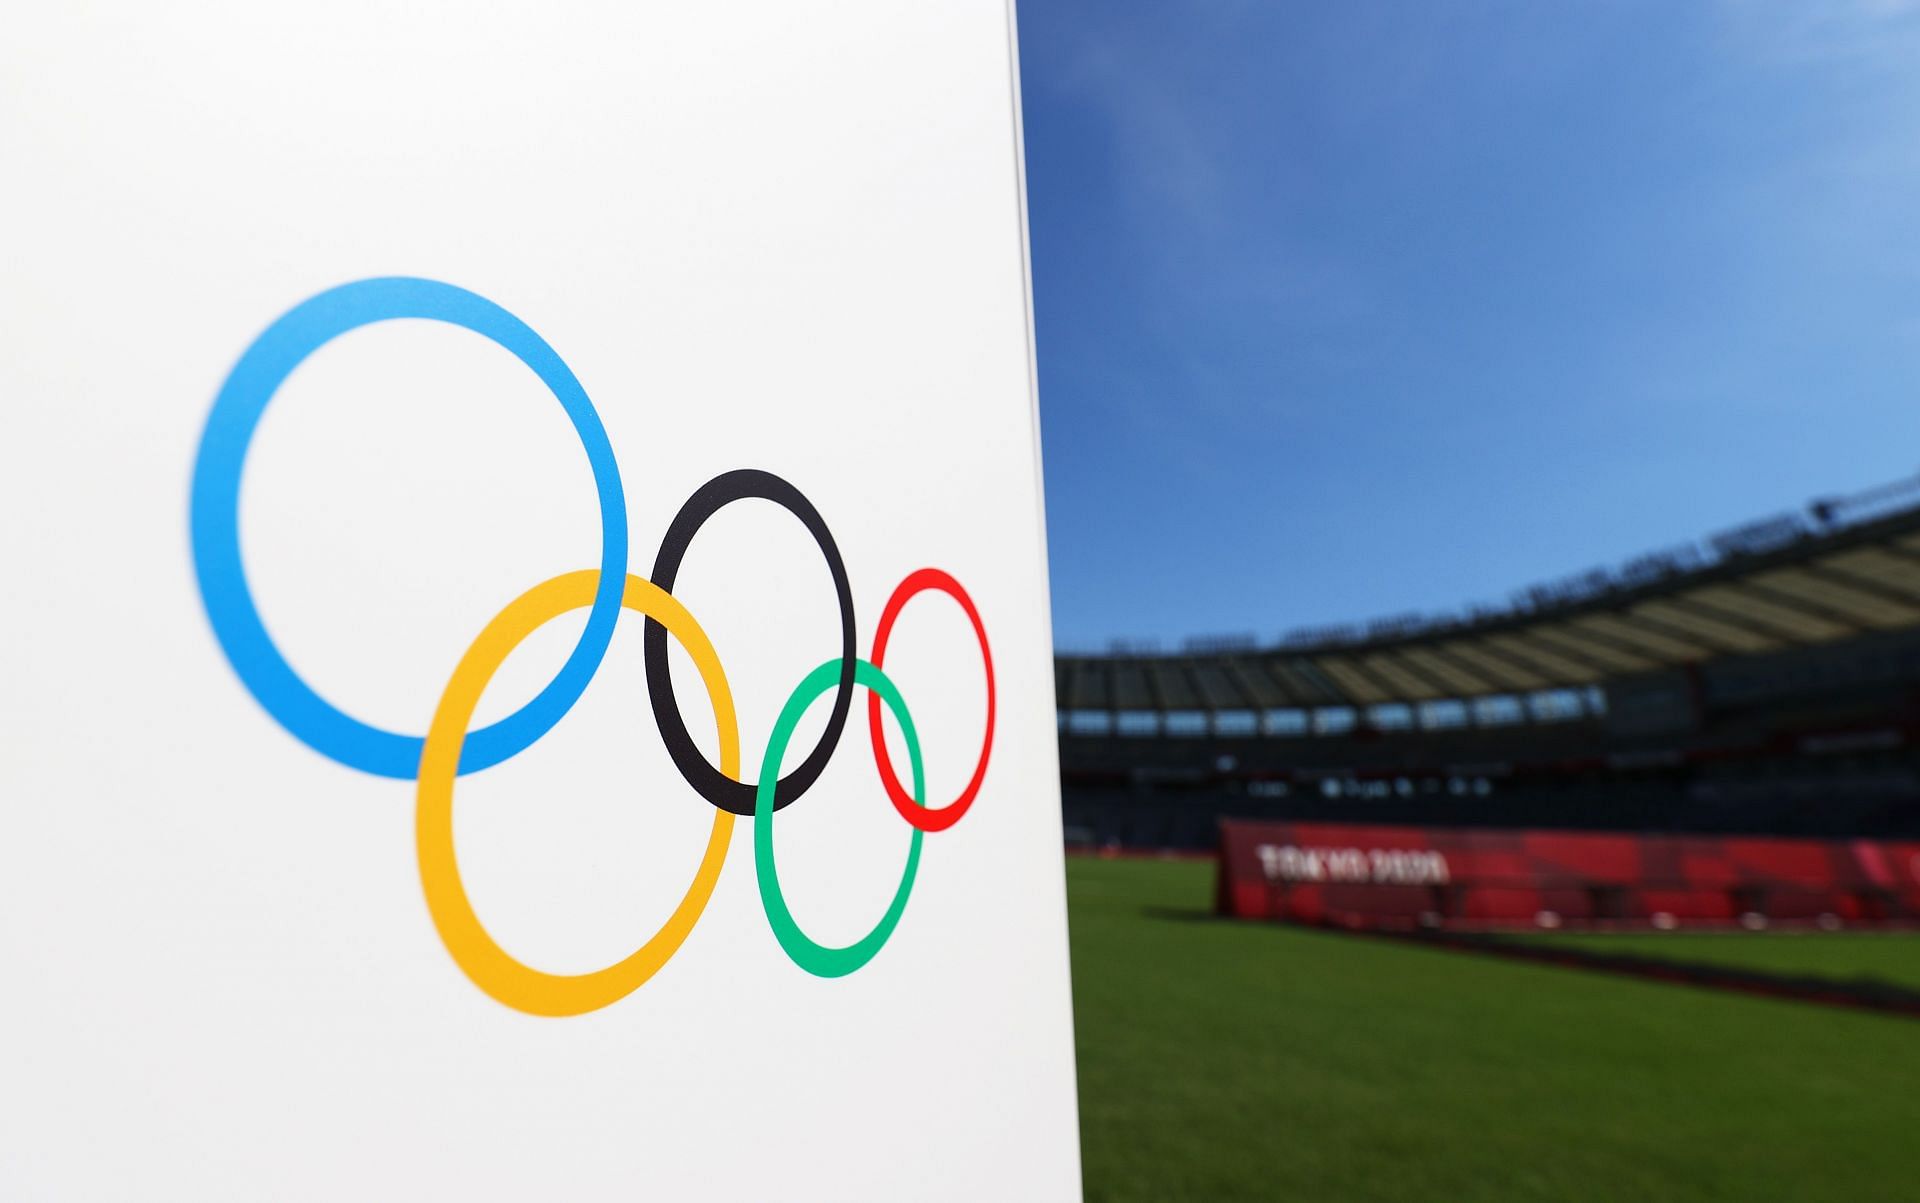 Olympics logo. (PC: Getty Images)